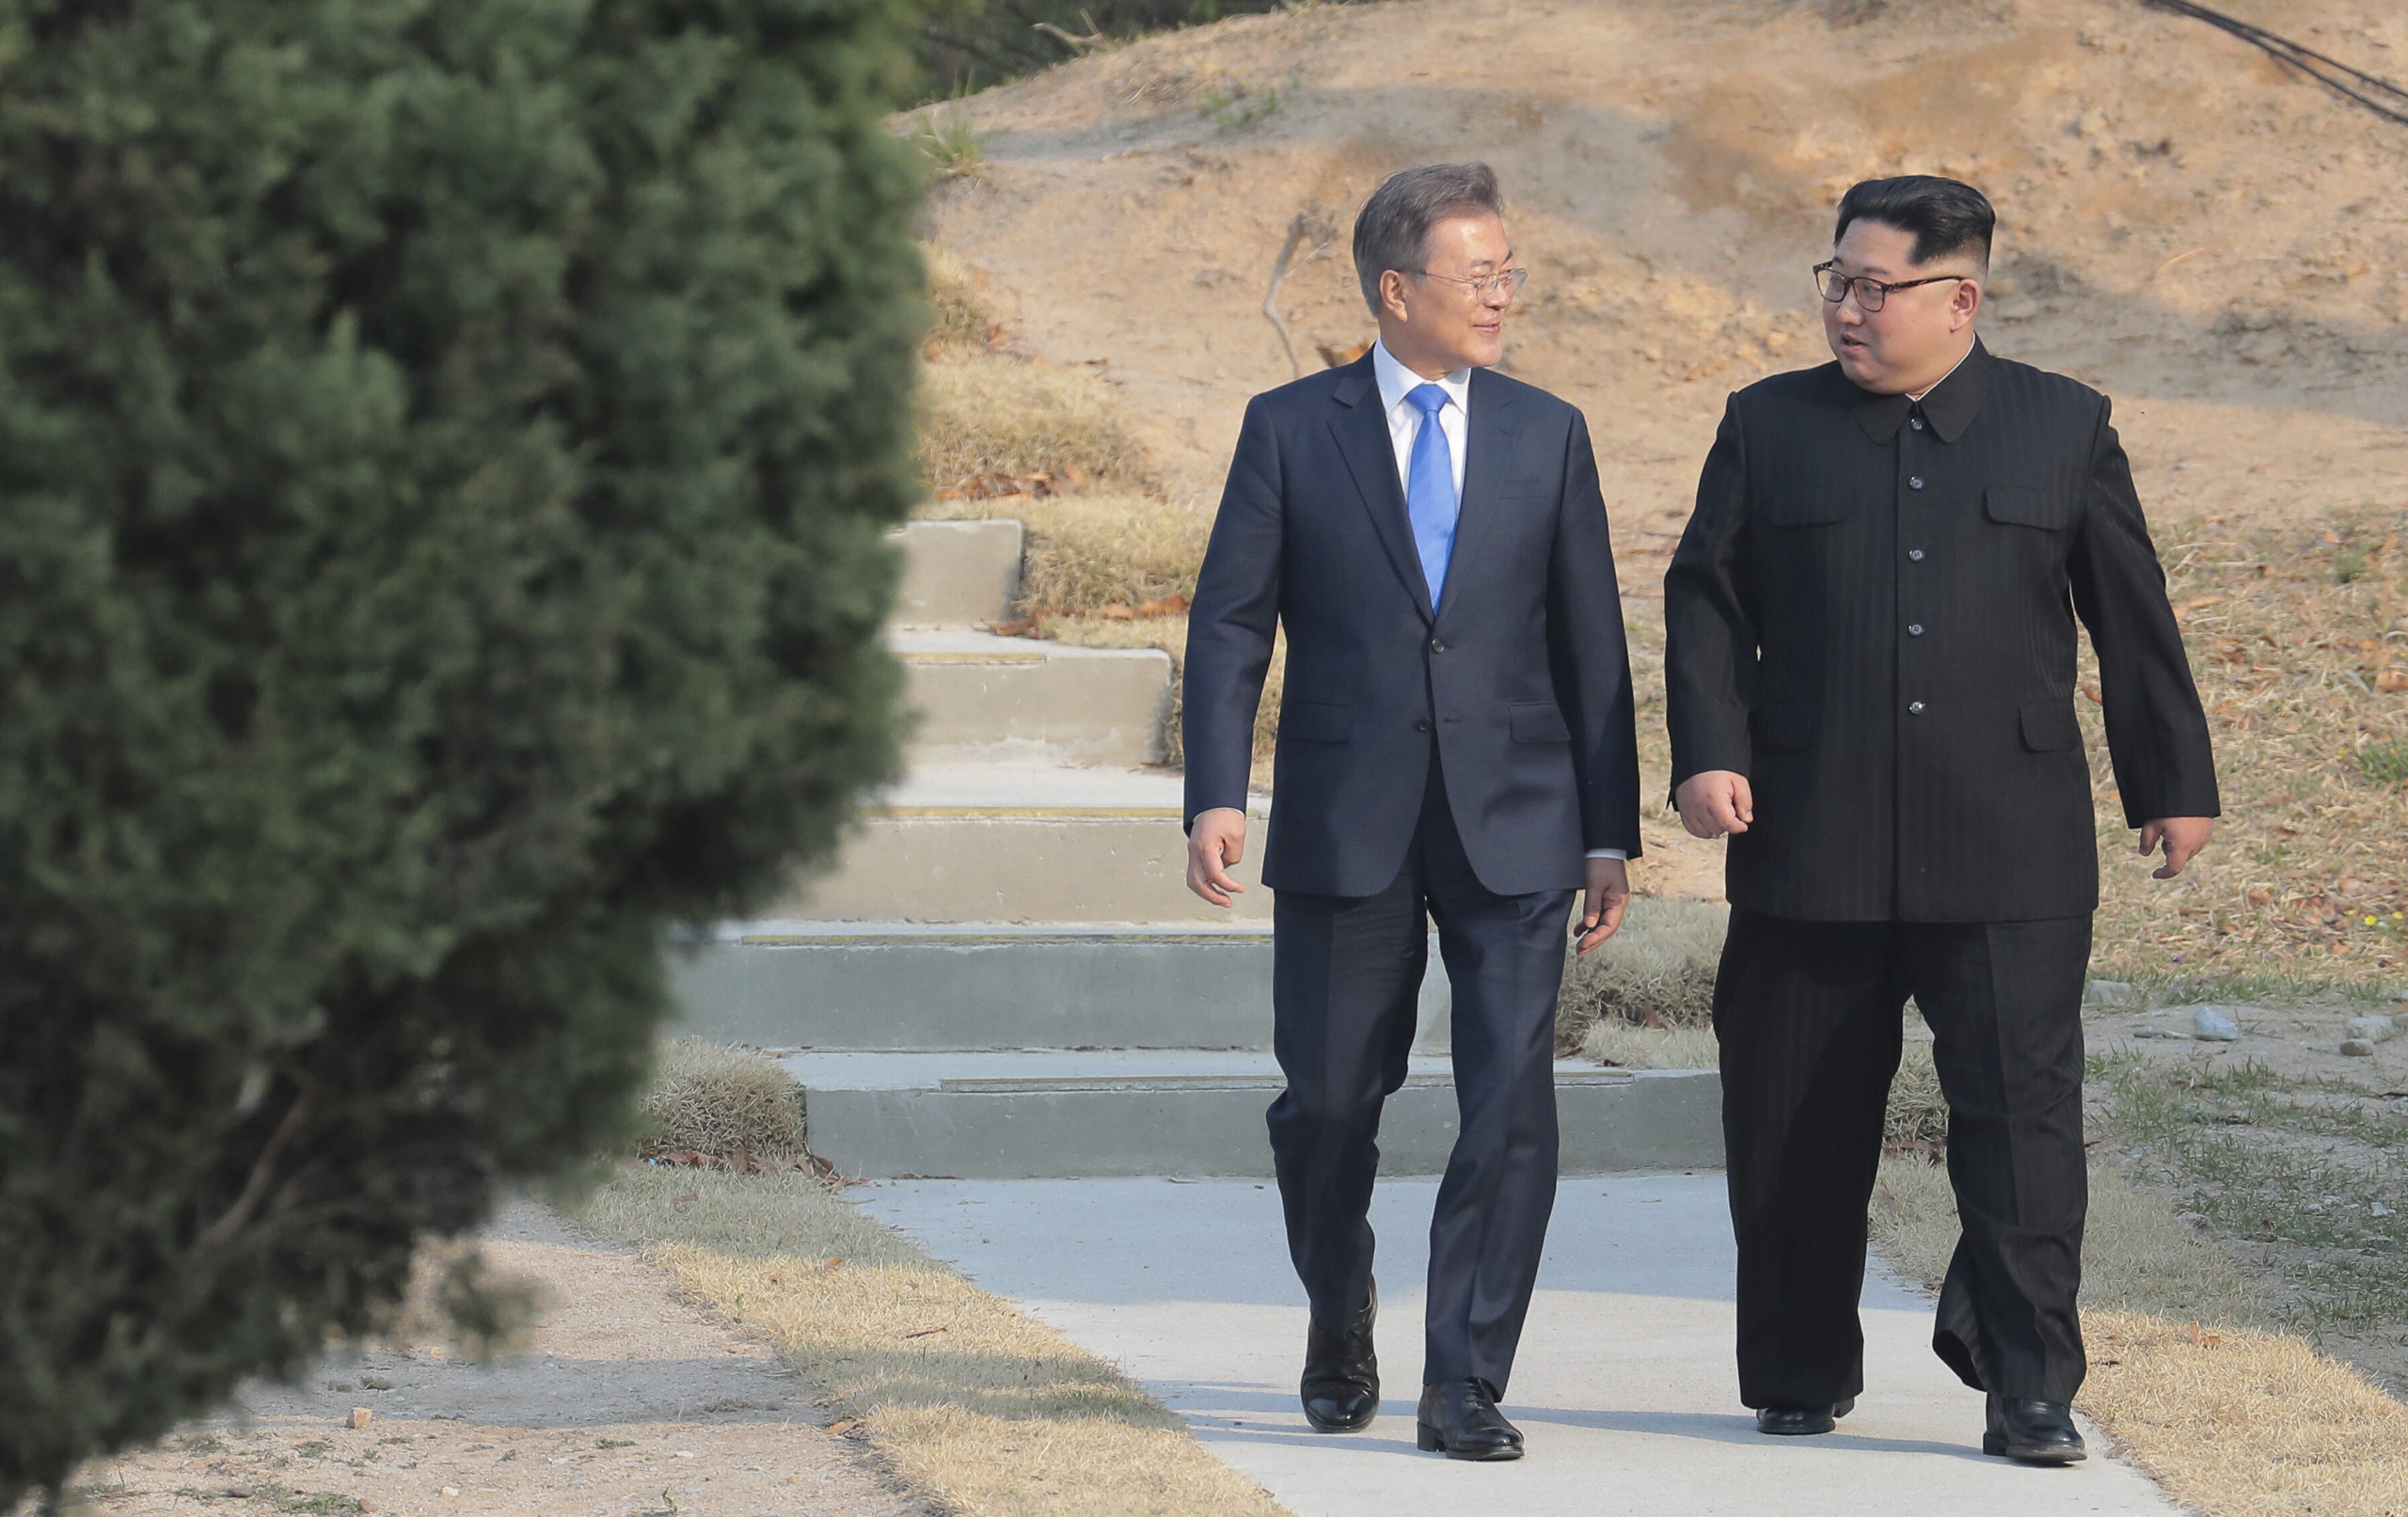 FILE - In this April 27, 2018 file photo, North Korean leader Kim Jong Un, right, and South Korean President Moon Jae-in stroll together at the border village of Panmunjom in the Demilitarized Zone, South Korea. North Korea on Saturday, June 13, 2020 again bashed South Korea, telling its rival to stop “nonsensical” talk about its denuclearization and vowing to expand its military capabilities. (Korea Summit Press Pool via AP, File)